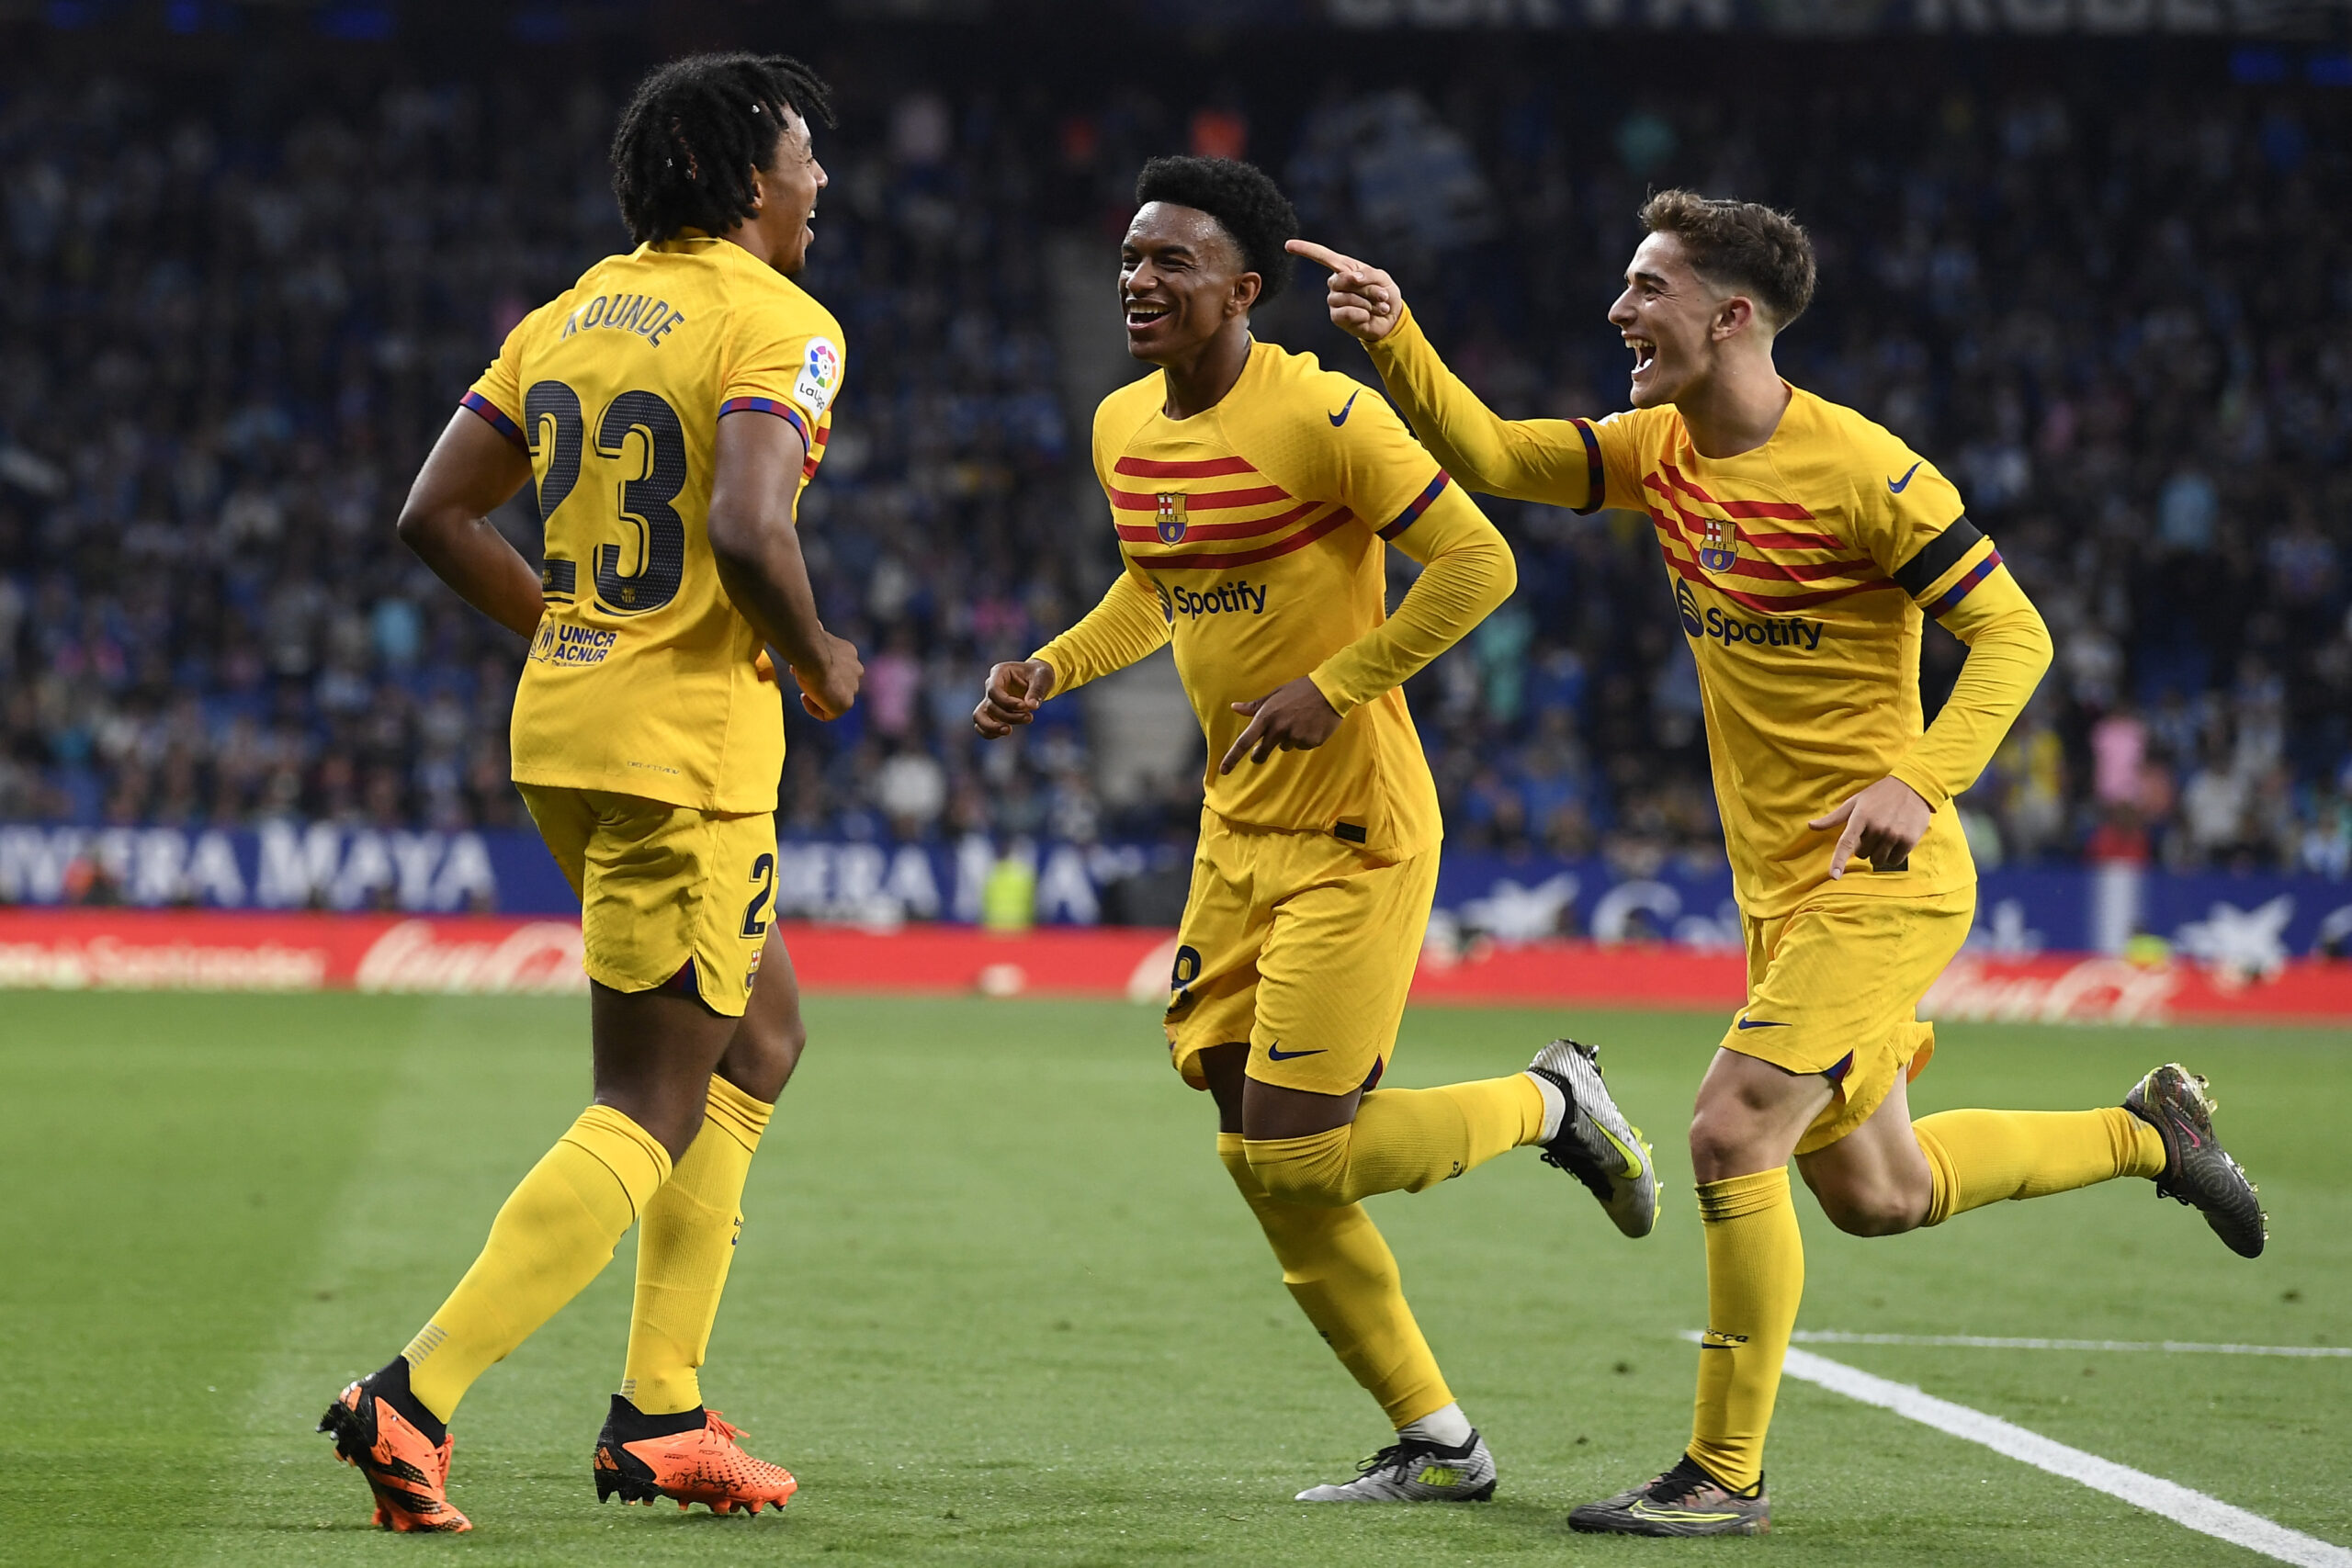 Barcelona's French defender Jules Kounde (L) celebrates scoring his team's fourth goal with Barcelona's Spanish defender Alejandro Balde (C) and Barcelona's Spanish midfielder Gavi during the Spanish league football match between RCD Espanyol and FC Barcelona at the RCDE Stadium in Cornella de Llobregat on May 14, 2023.